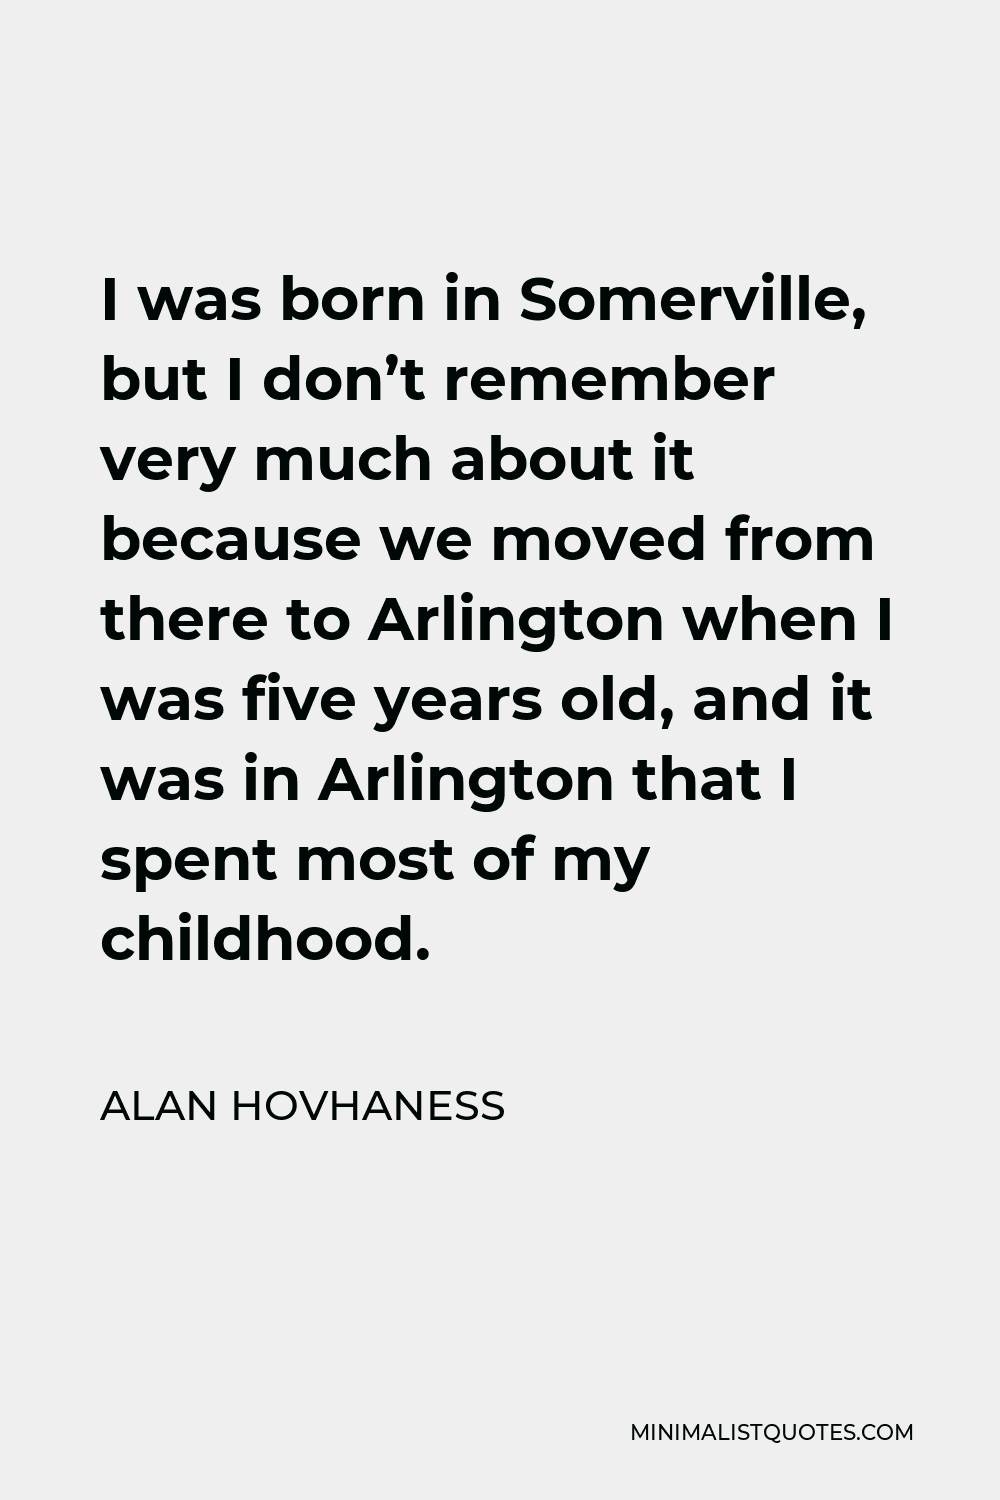 Alan Hovhaness Quote - I was born in Somerville, but I don’t remember very much about it because we moved from there to Arlington when I was five years old, and it was in Arlington that I spent most of my childhood.